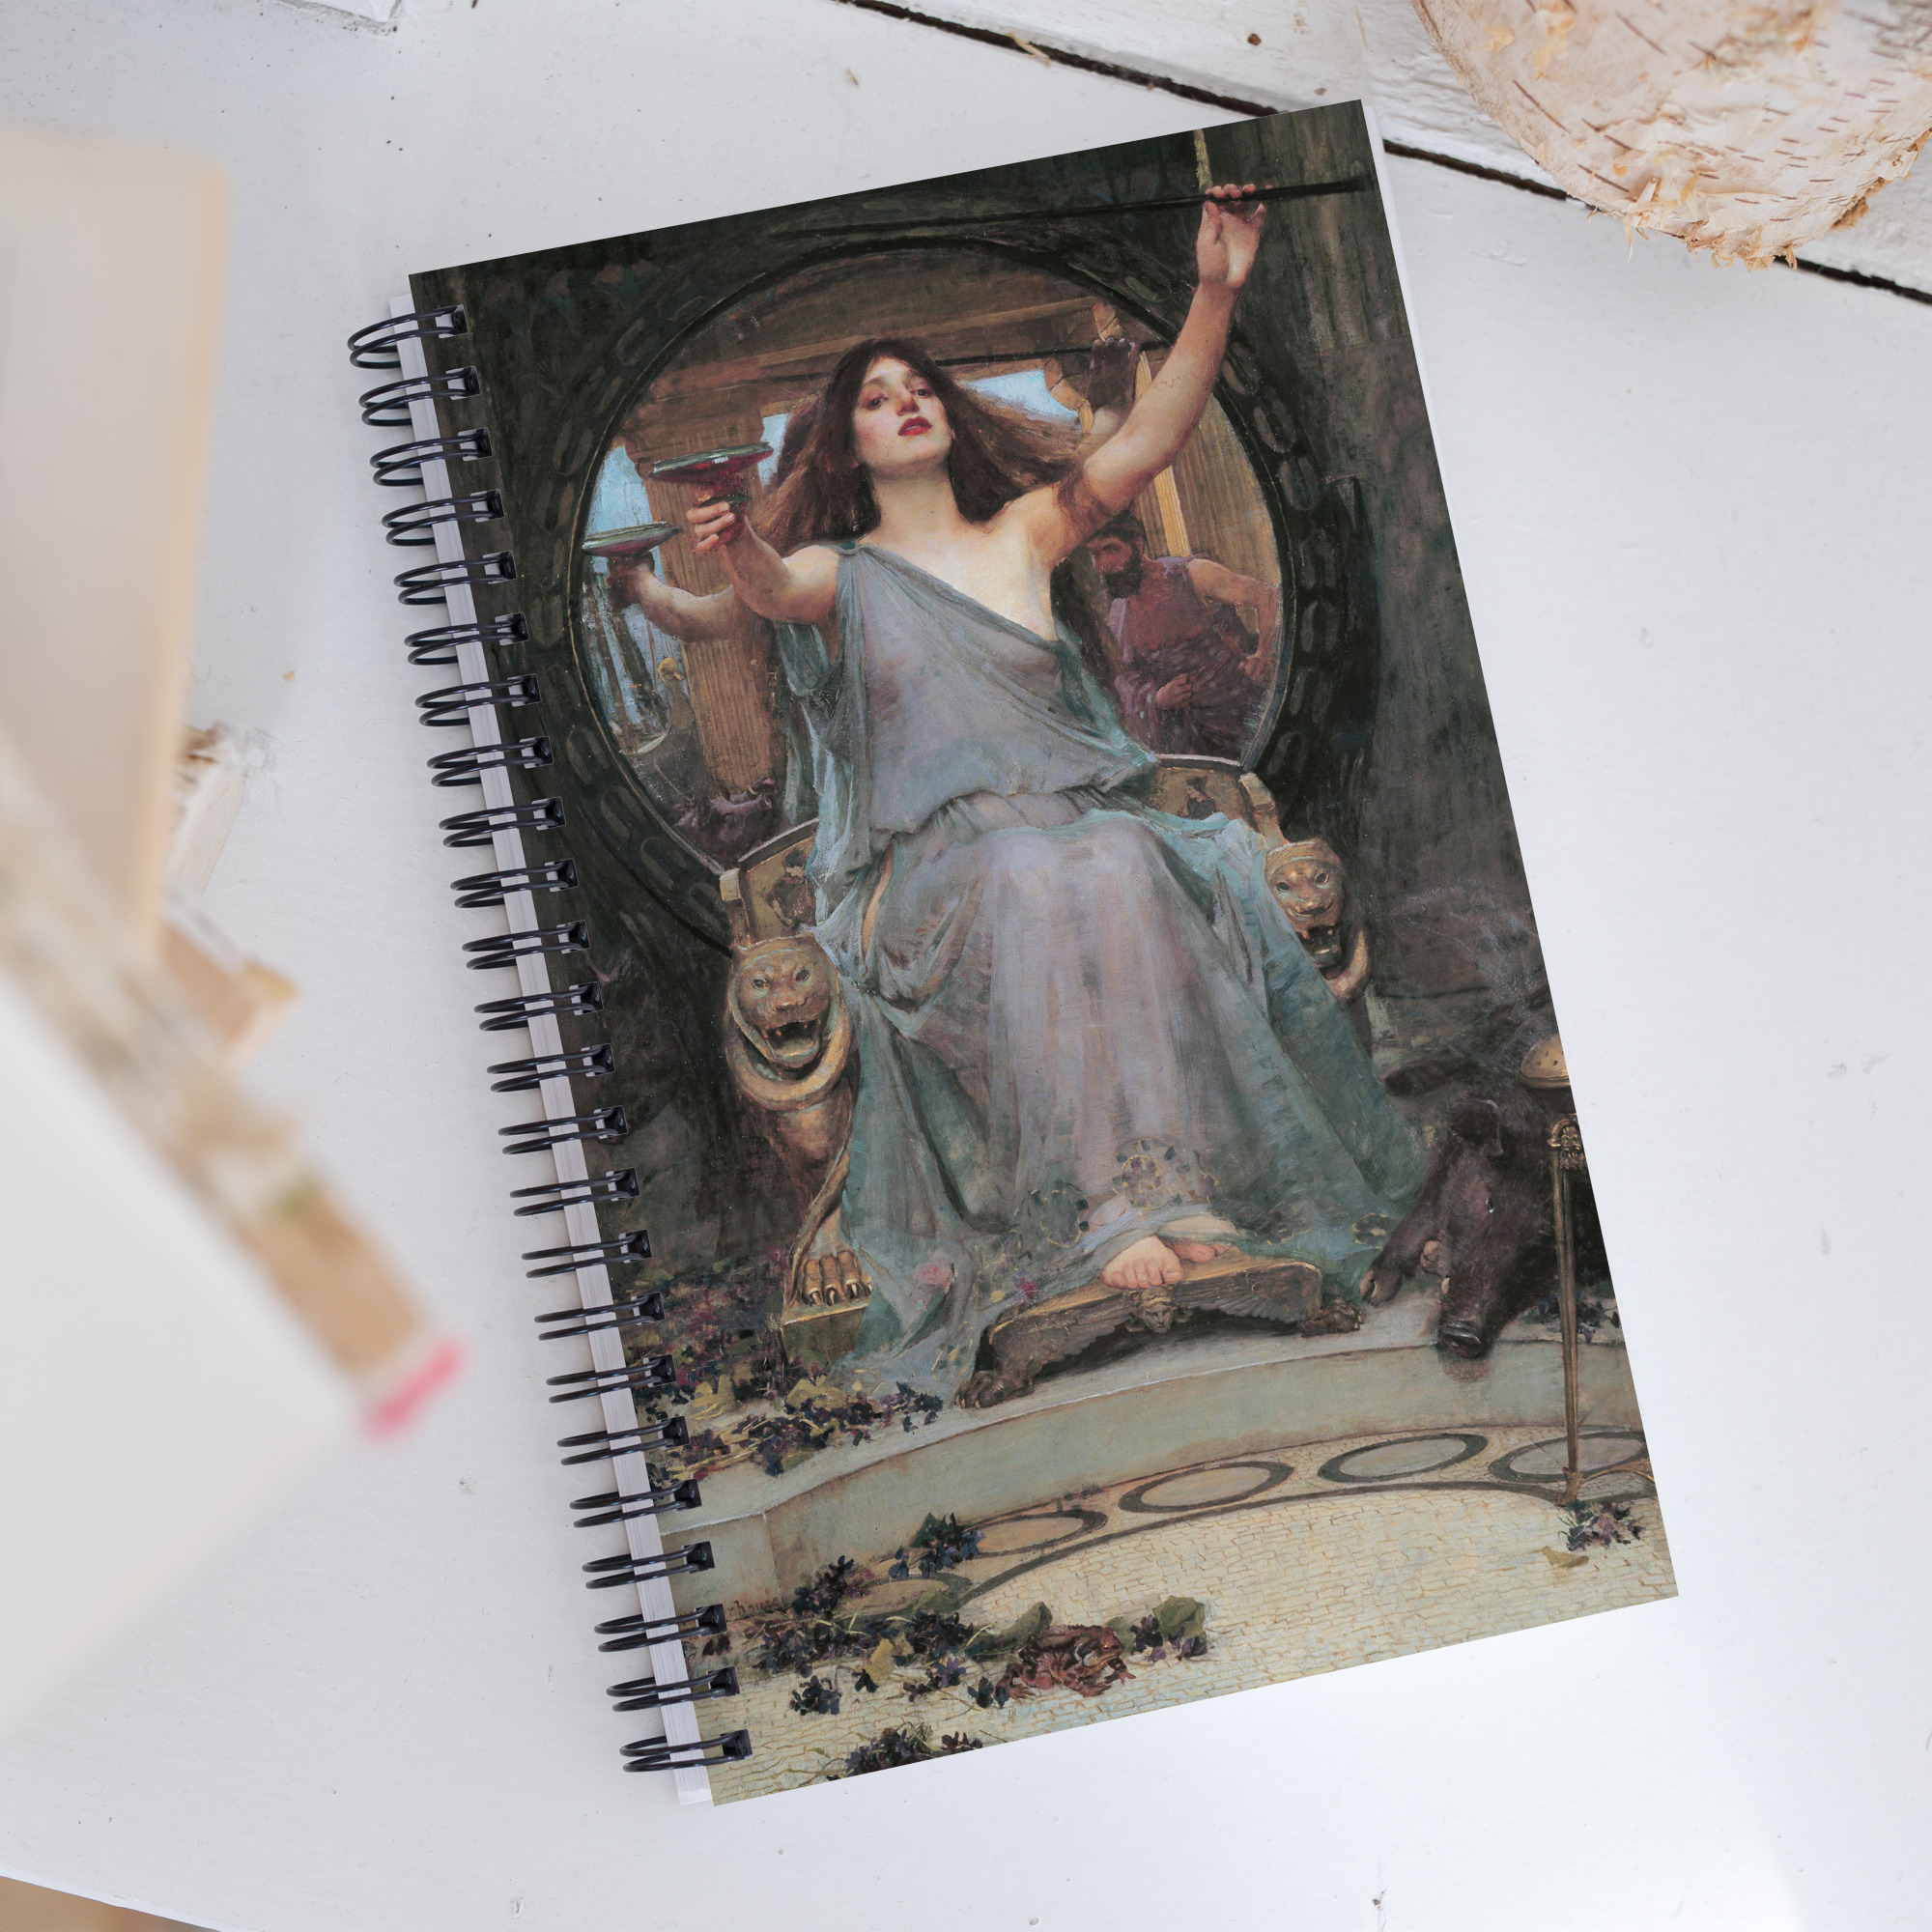 Circe Offering the Cup to Odysseus by John William Waterhouse Spiral Notebook Dark Academia, Gothic Art, Macabre, Boho, Bohemian